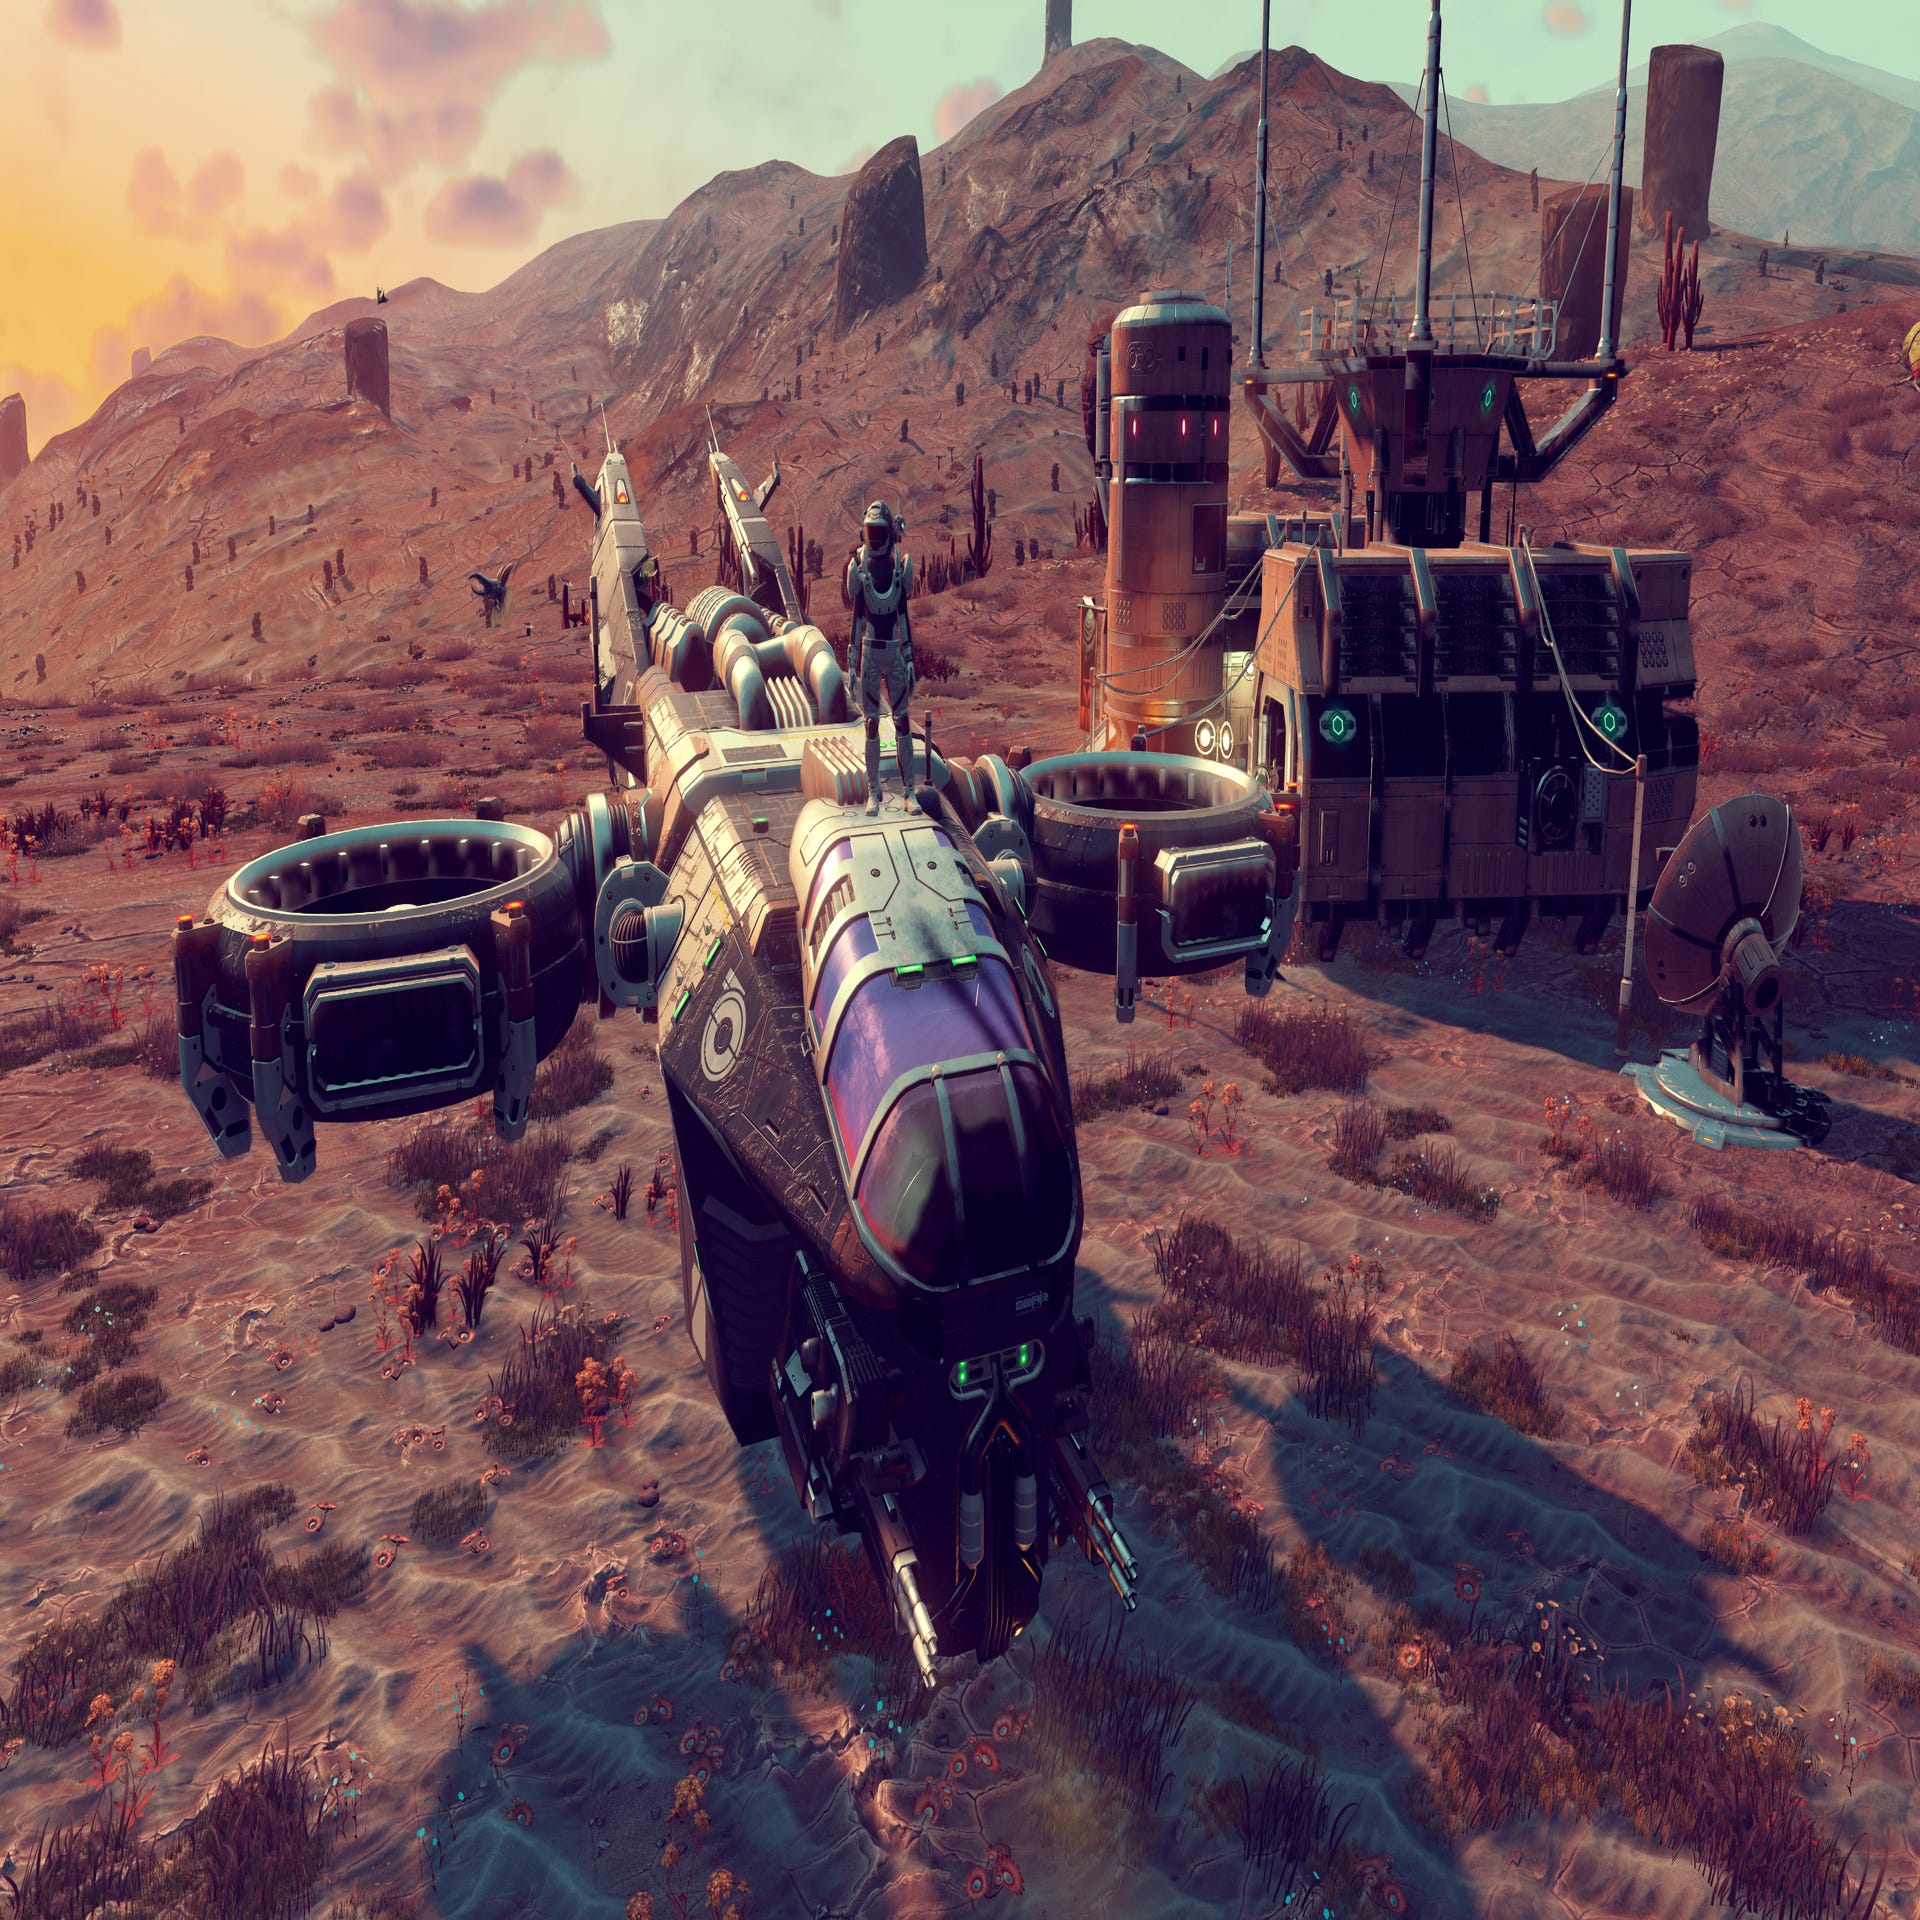 No Man's Sky's latest update lets players explore a lonely abandoned universe devoid of life